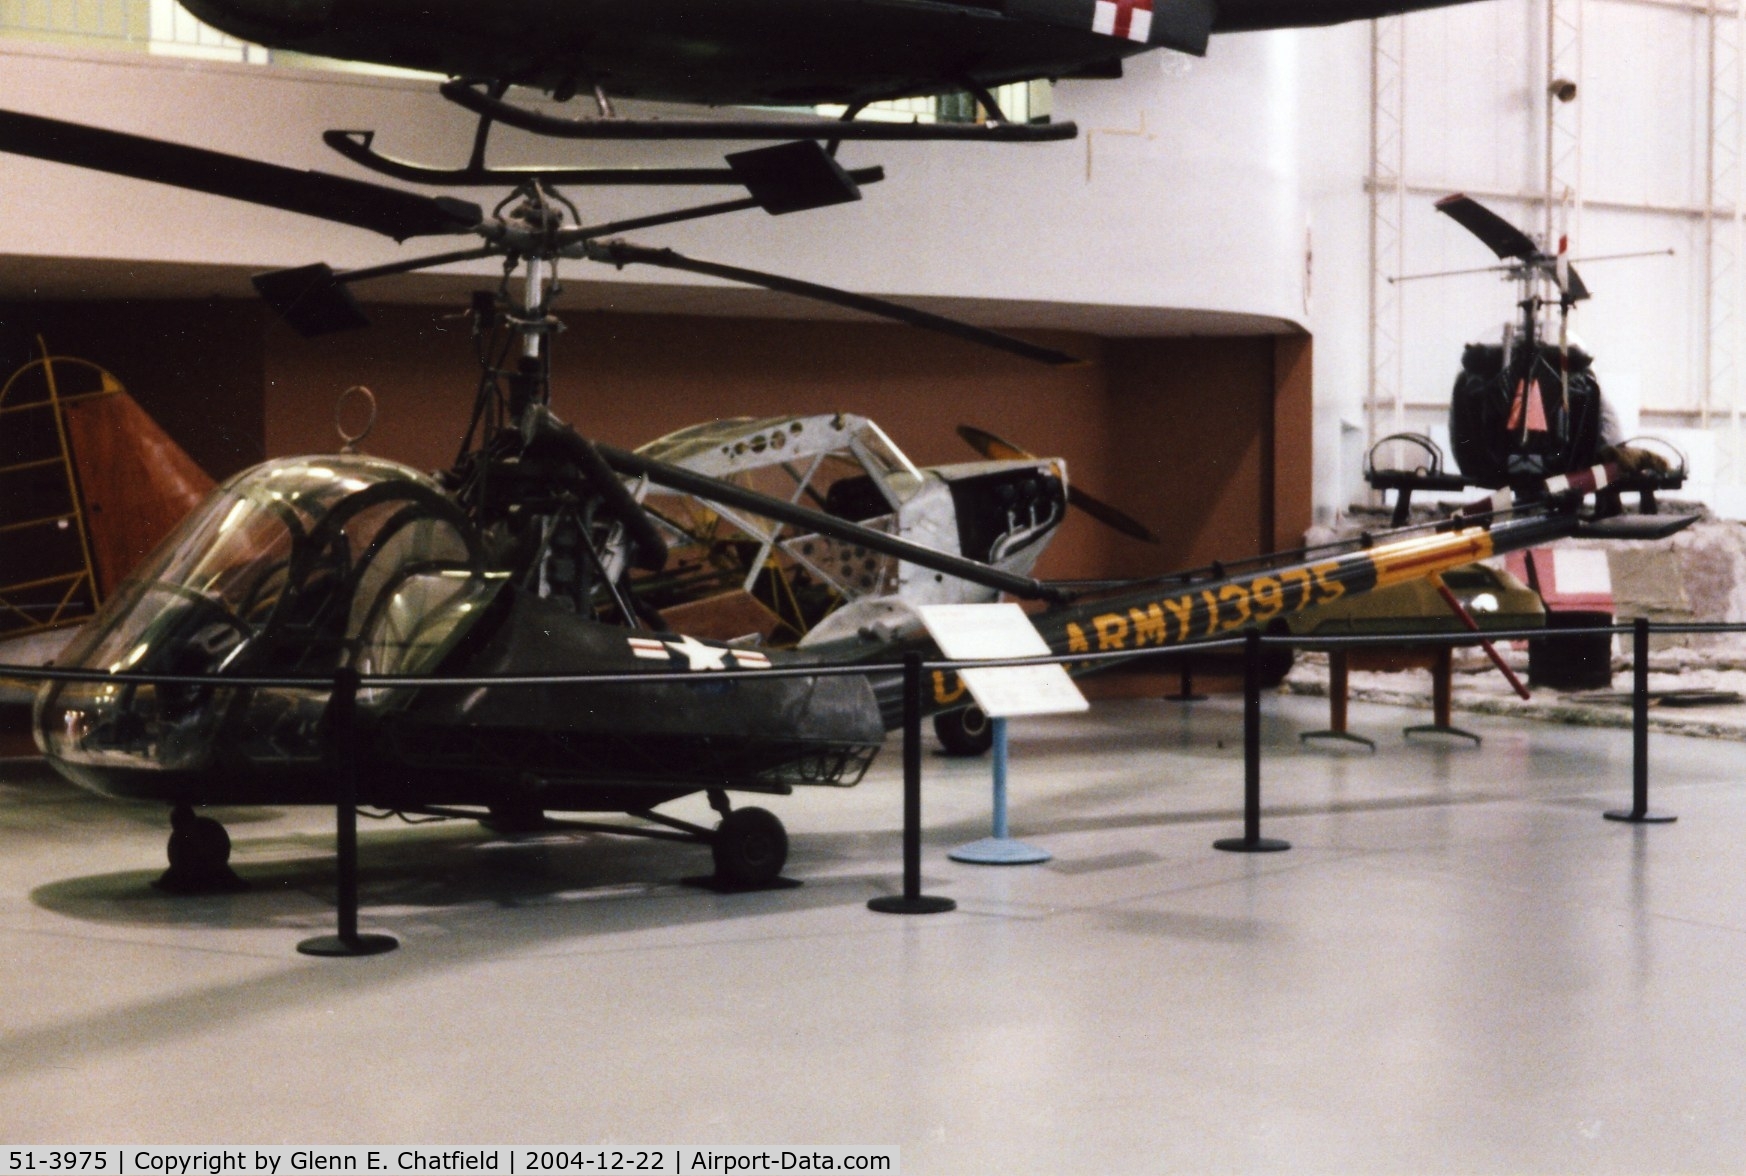 51-3975, 1951 Hiller UH-23B Raven C/N 188, UH-23B at the Army Aviation Museum